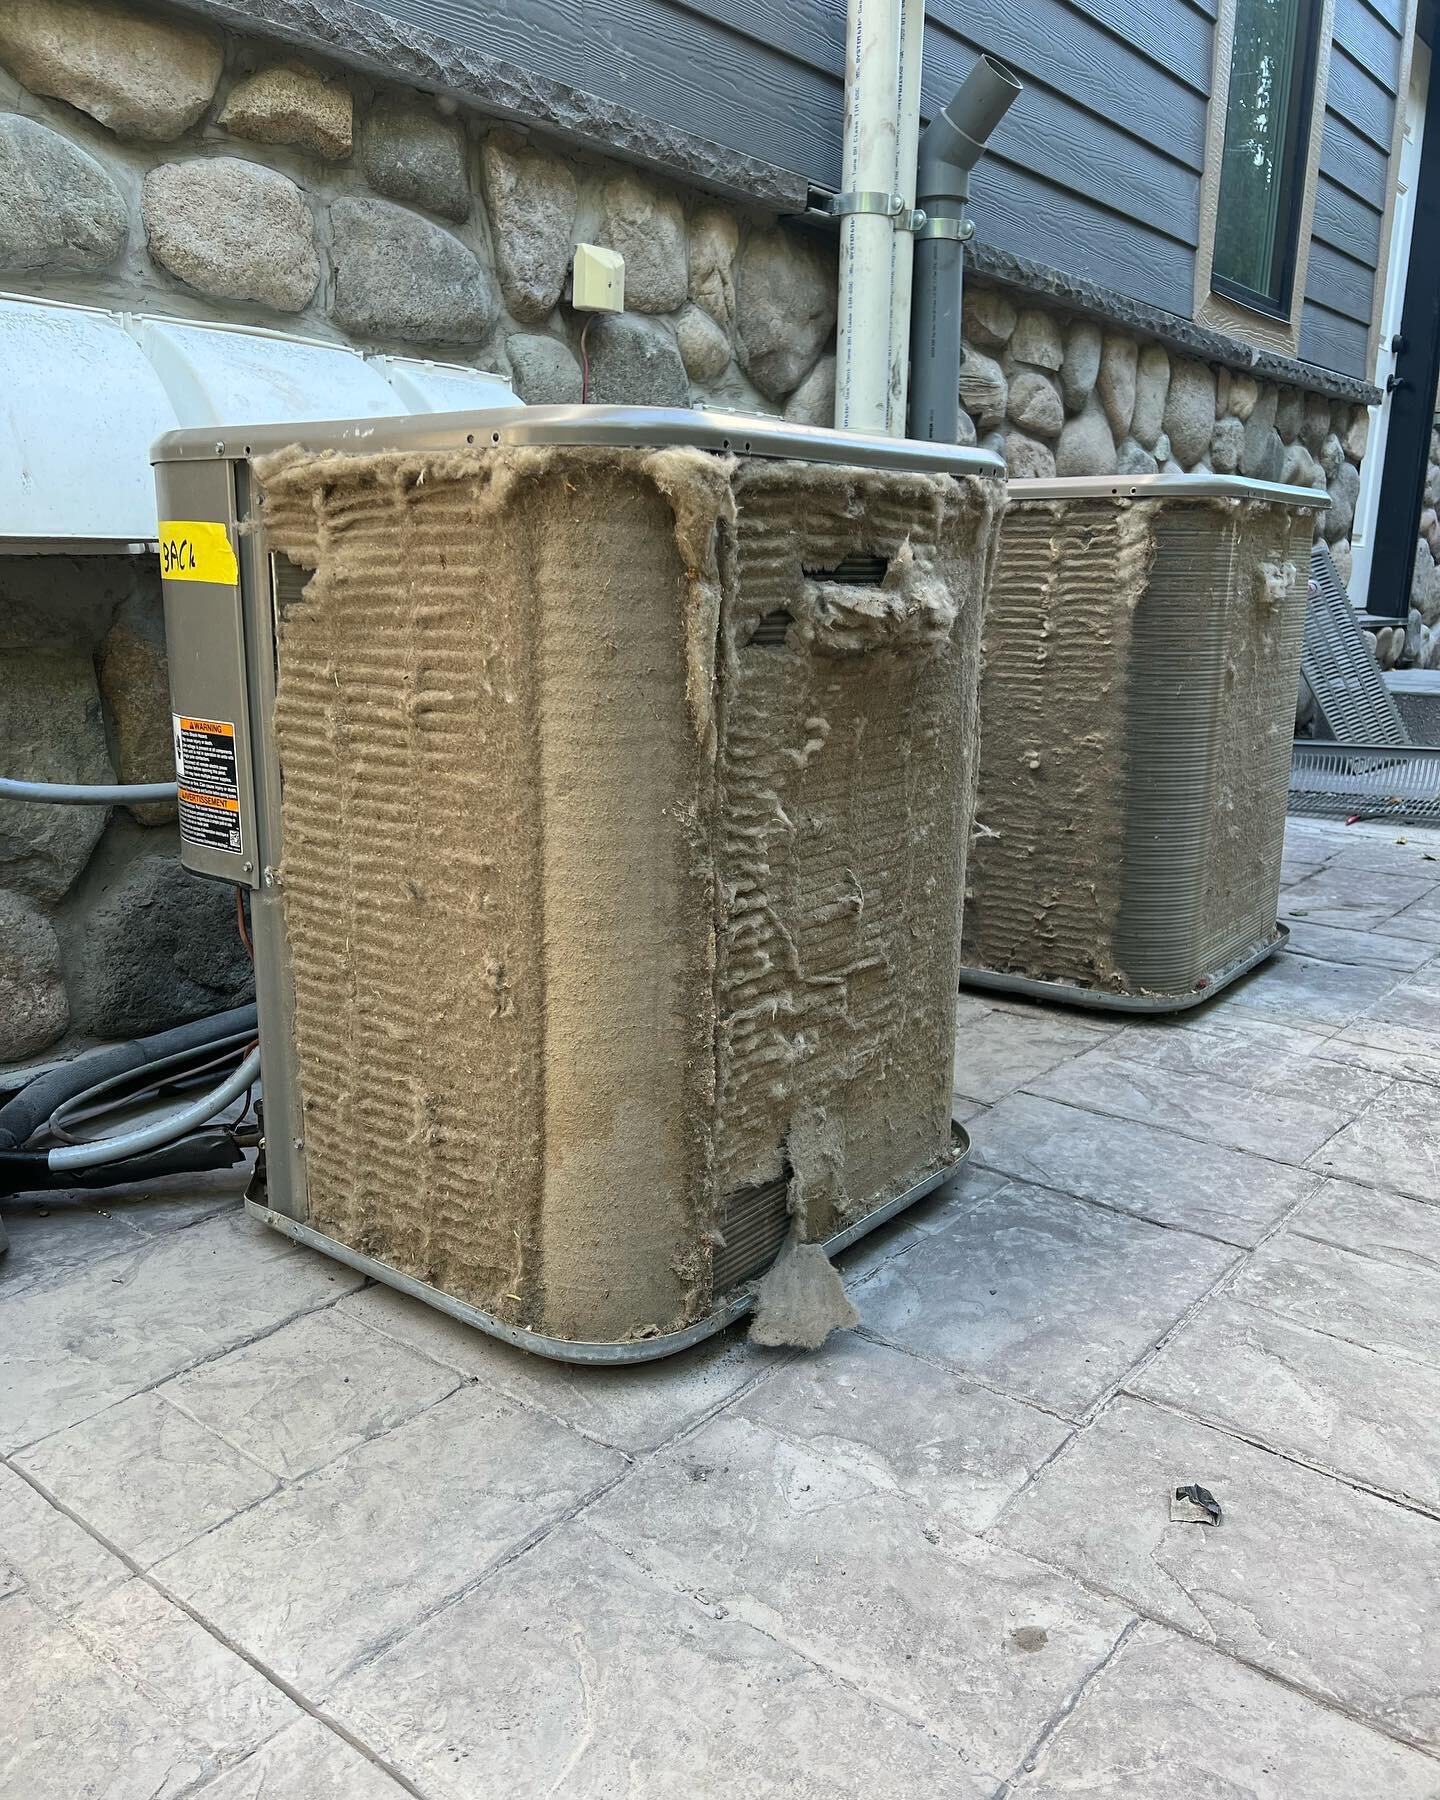 Air conditioning units need TLC, too! 
&bull;
Scroll for before and after pictures of an AC deep clean!
&bull;
Annual cleanings like this help keep AC&rsquo;s running smoothly when you need them the most! Stay frosty ❄️ 
&bull;
&bull;
#yyc #yycplumbi